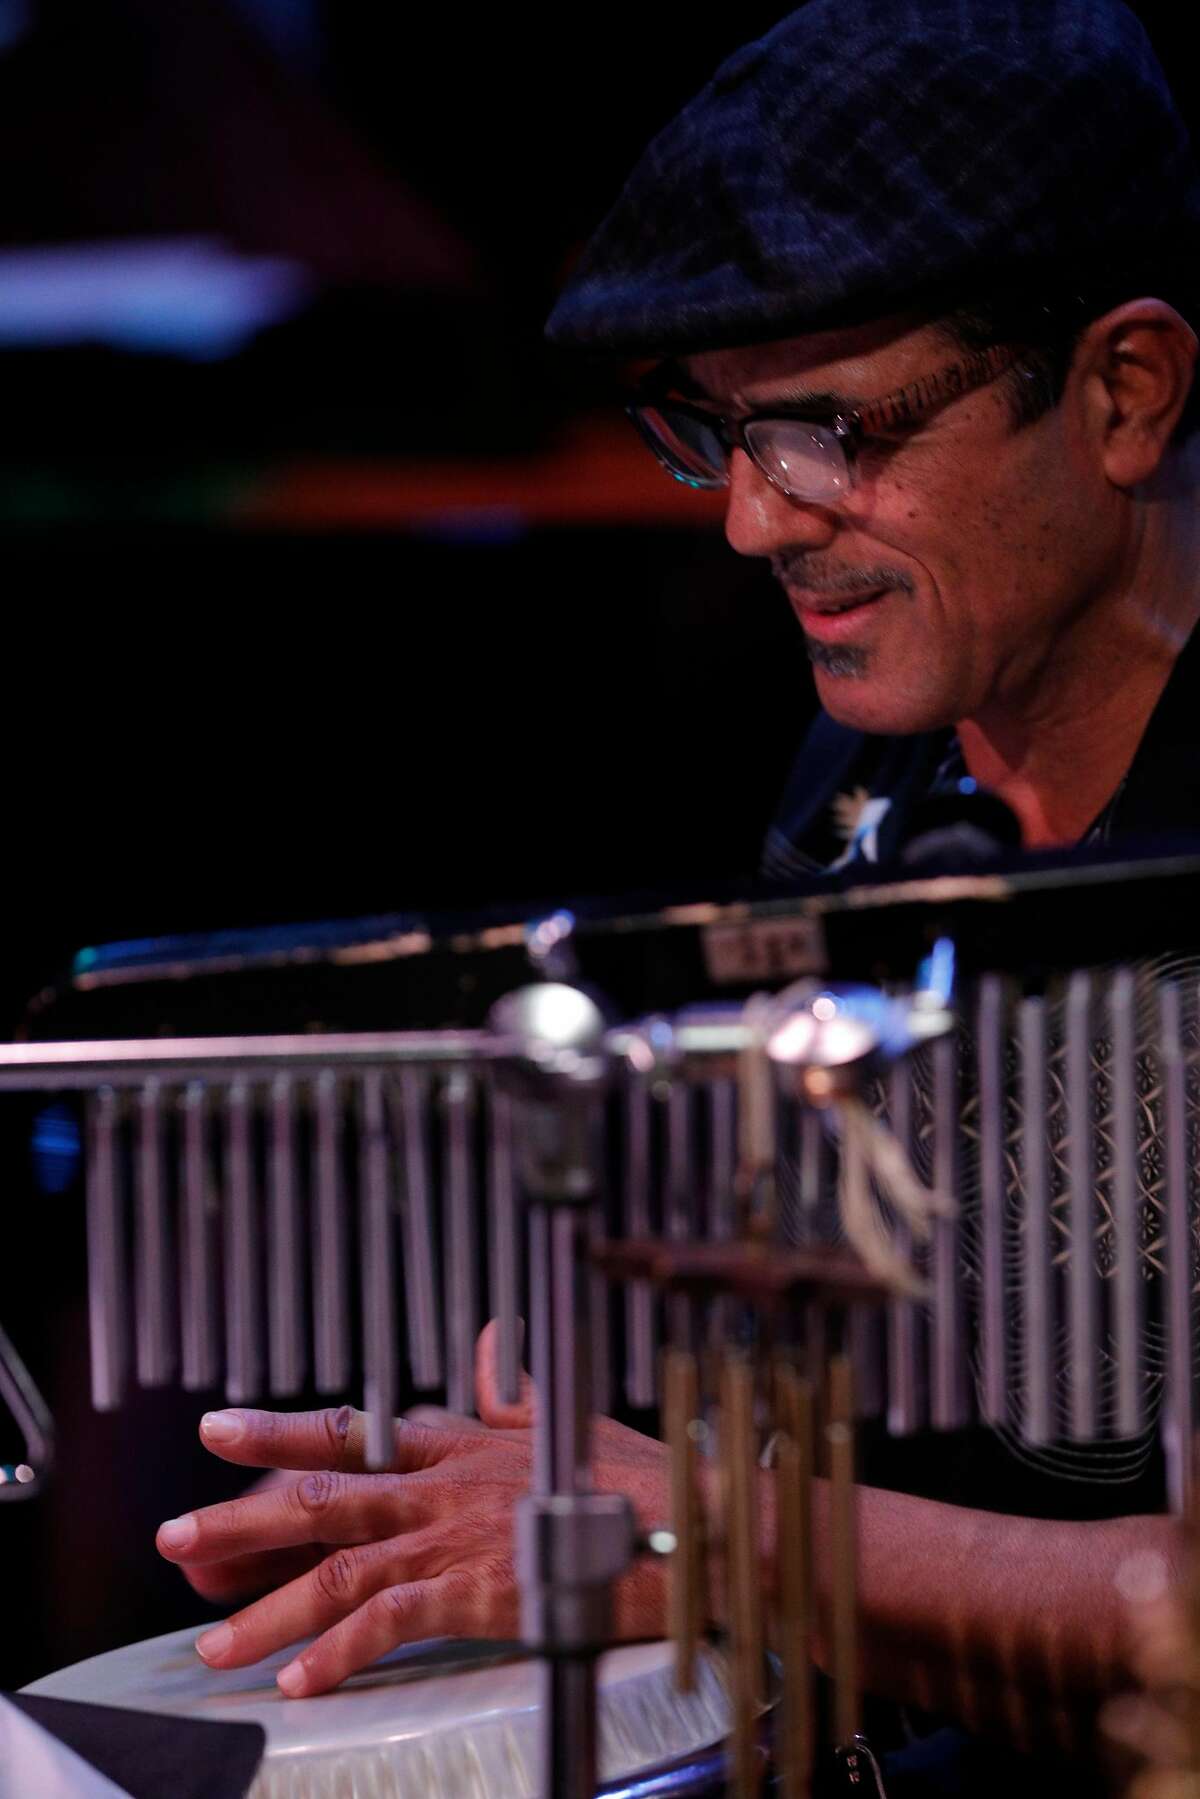 Percussionist John Santos plays with Electric Squeezebox Orchestra during the Cal Jazz Conservatory Fiddler Annex grand opening week final concert in Berkeley, Calif., on Sunday, March 4, 2018. The concert featured the Electric Squeezebox Orchestra, a 17-piece big band led by Erik Jekabson and special guest percussionist John Santos as well as the Cosmic Conquerors, a 14-piece big band, led by Isaiah Hammer.